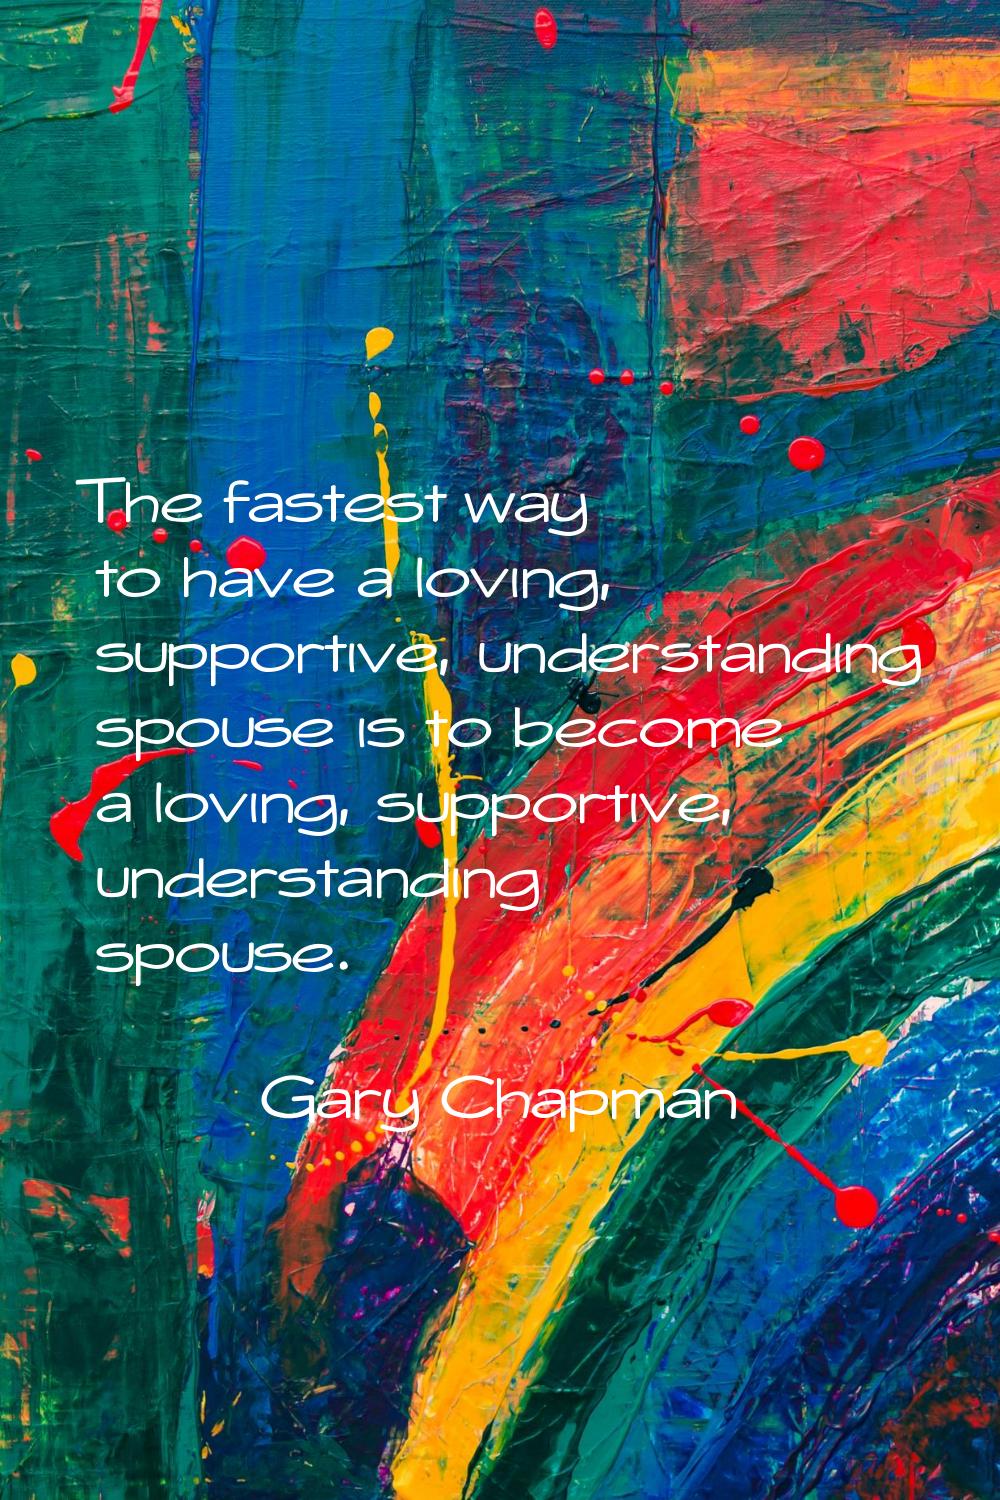 The fastest way to have a loving, supportive, understanding spouse is to become a loving, supportiv